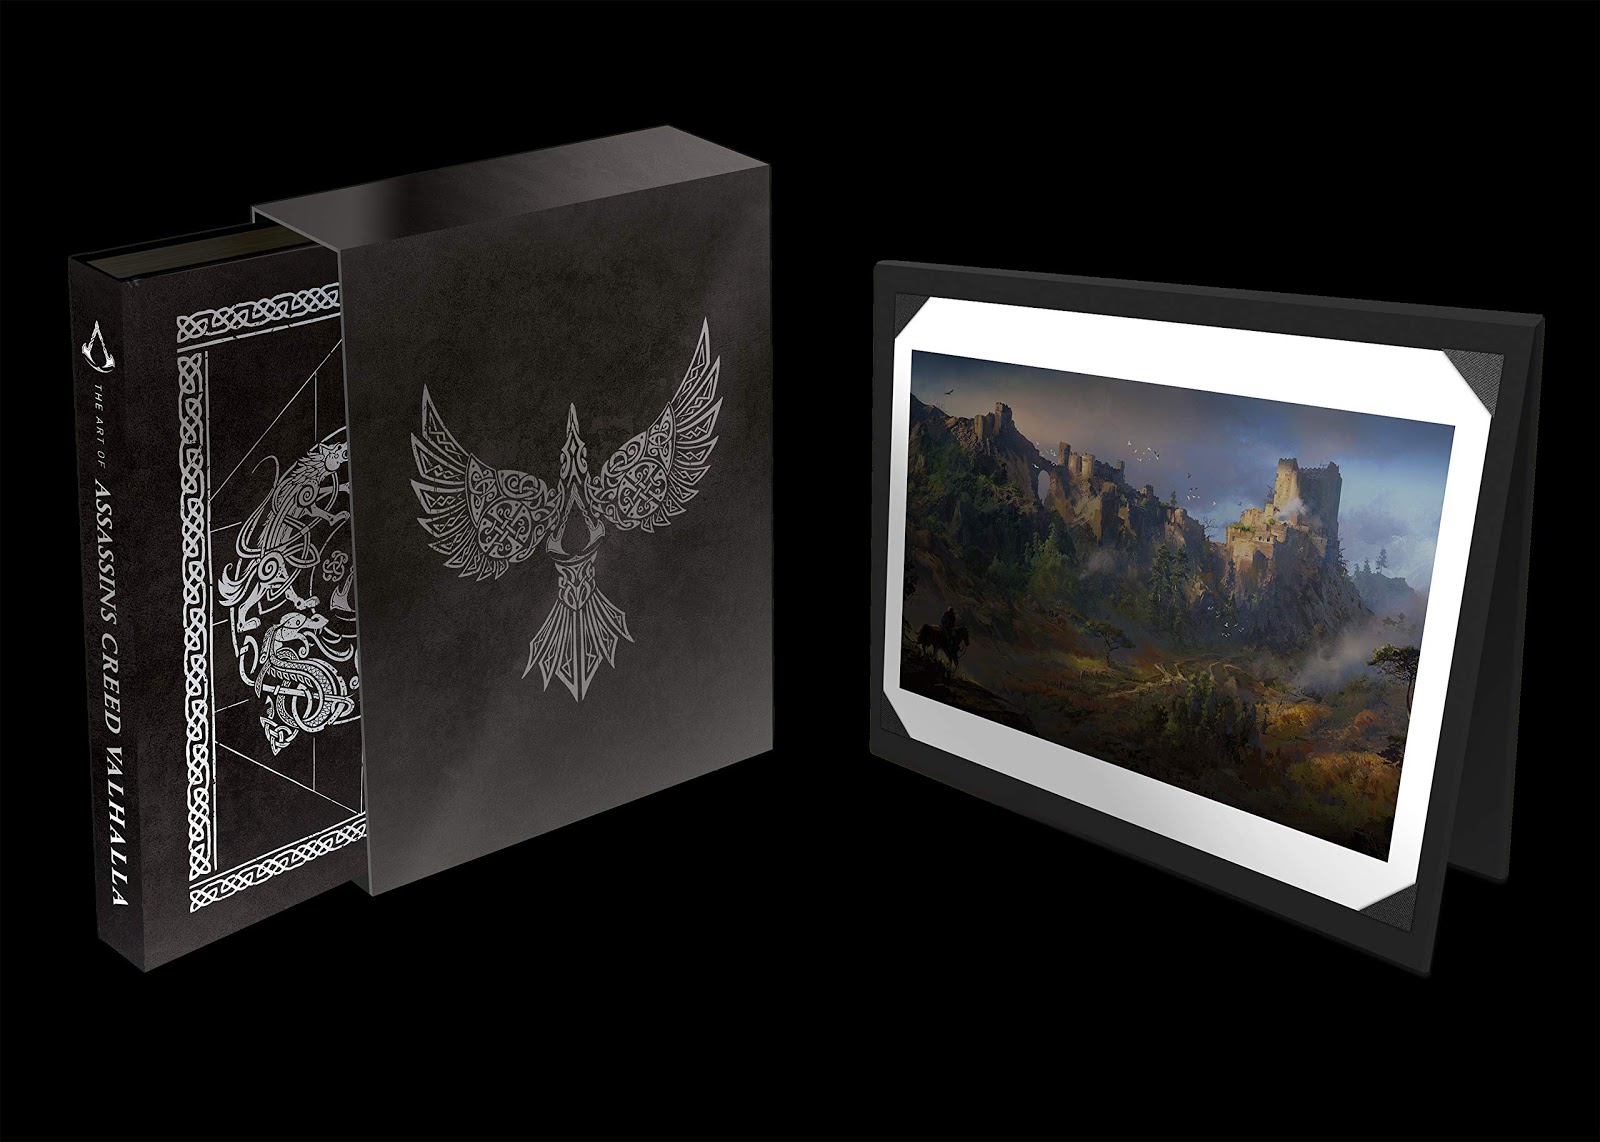 AC Valhalla: Assassin's Creed Valhalla Collectors' Editions and C...